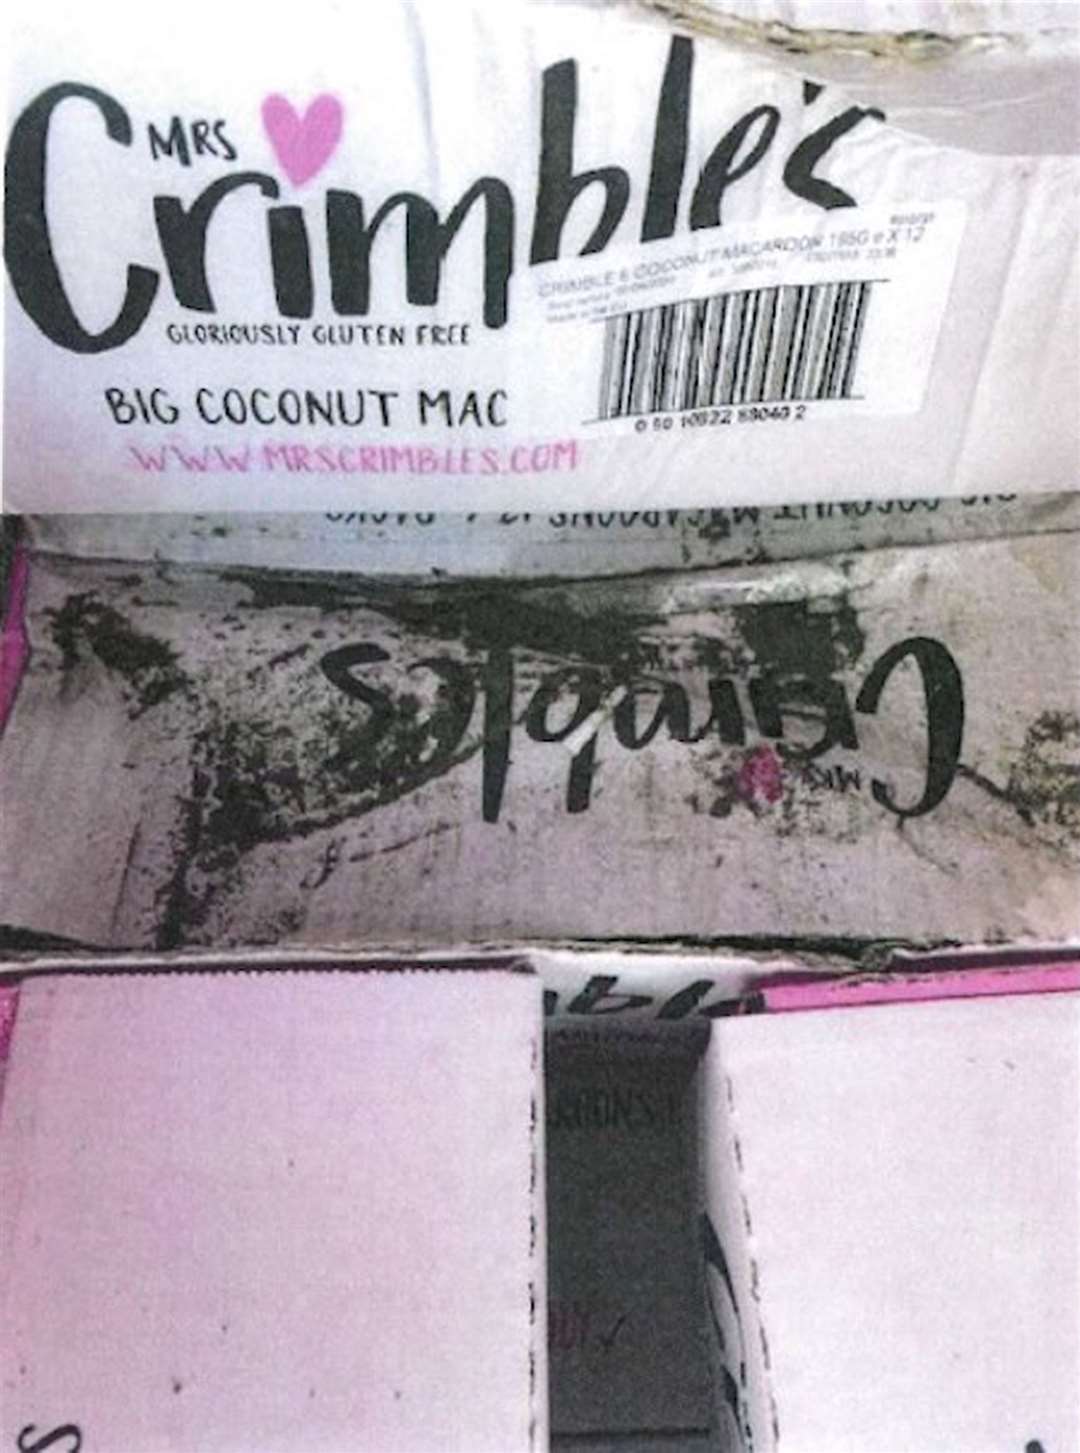 Damaged boxes of Mrs Crimble’s macaroons that were on the lorry of Christopher Kennedy on October 18 2019 (Essex Police/PA)